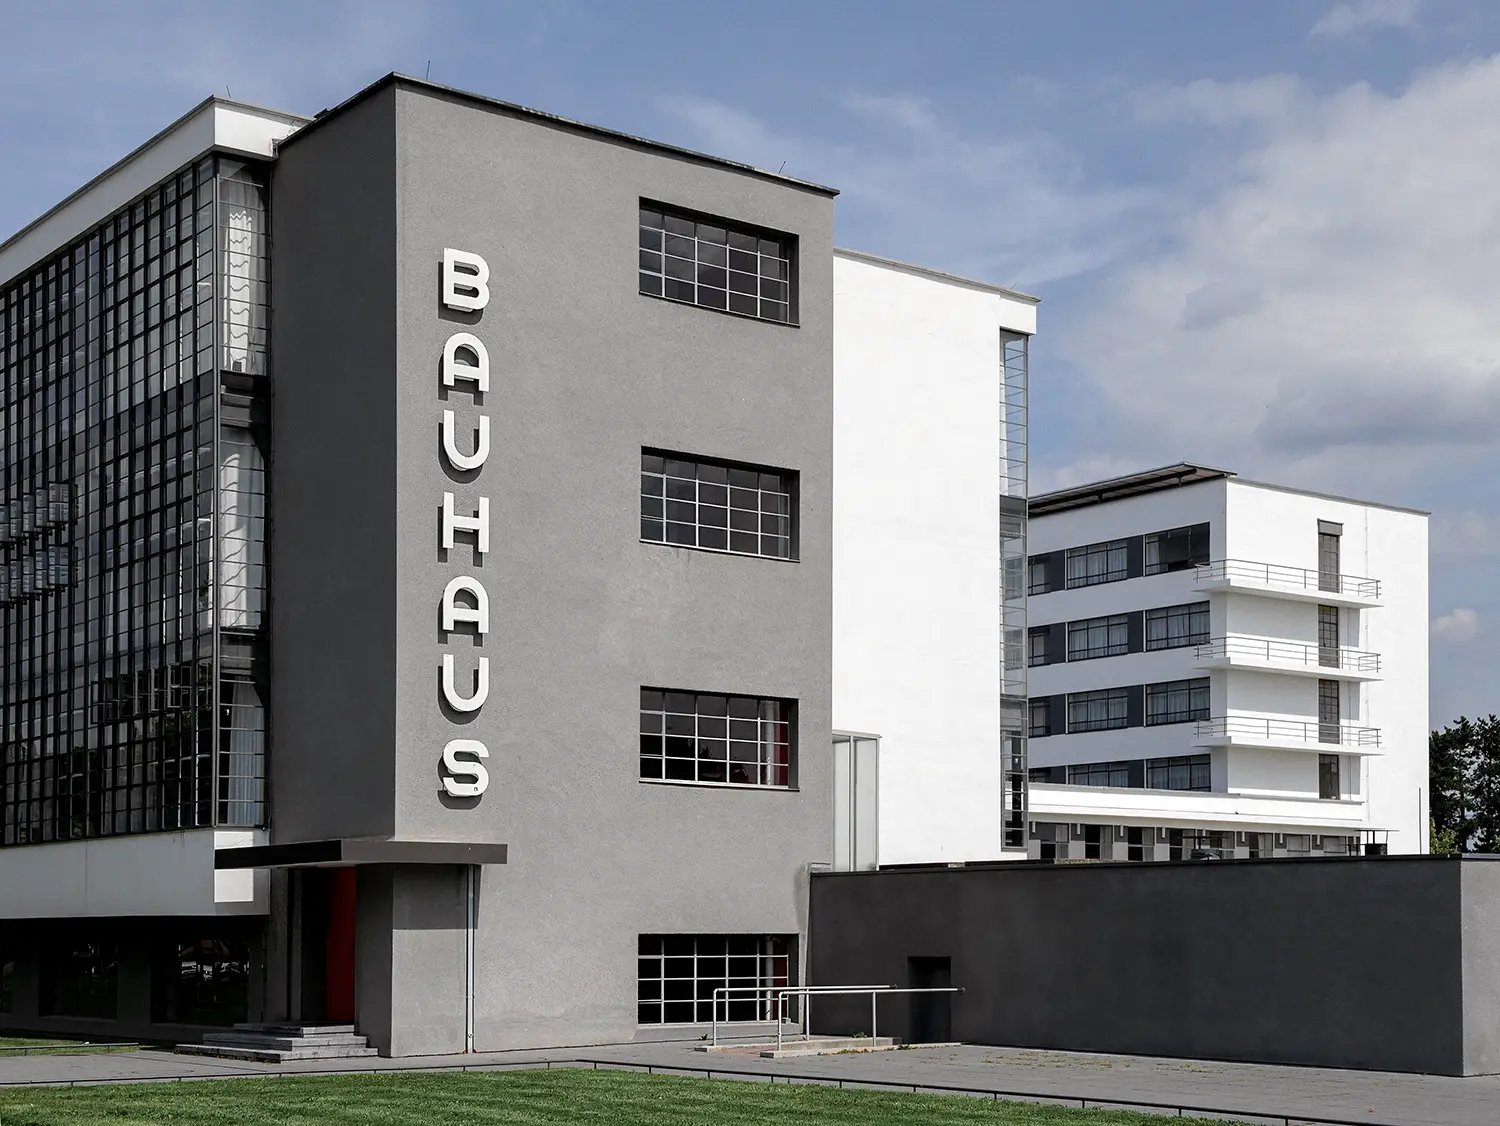 A photo of the BauHaus art school in Germany, where pioneers of Industrial Design like Architect and product designer Walter Gropius taught.